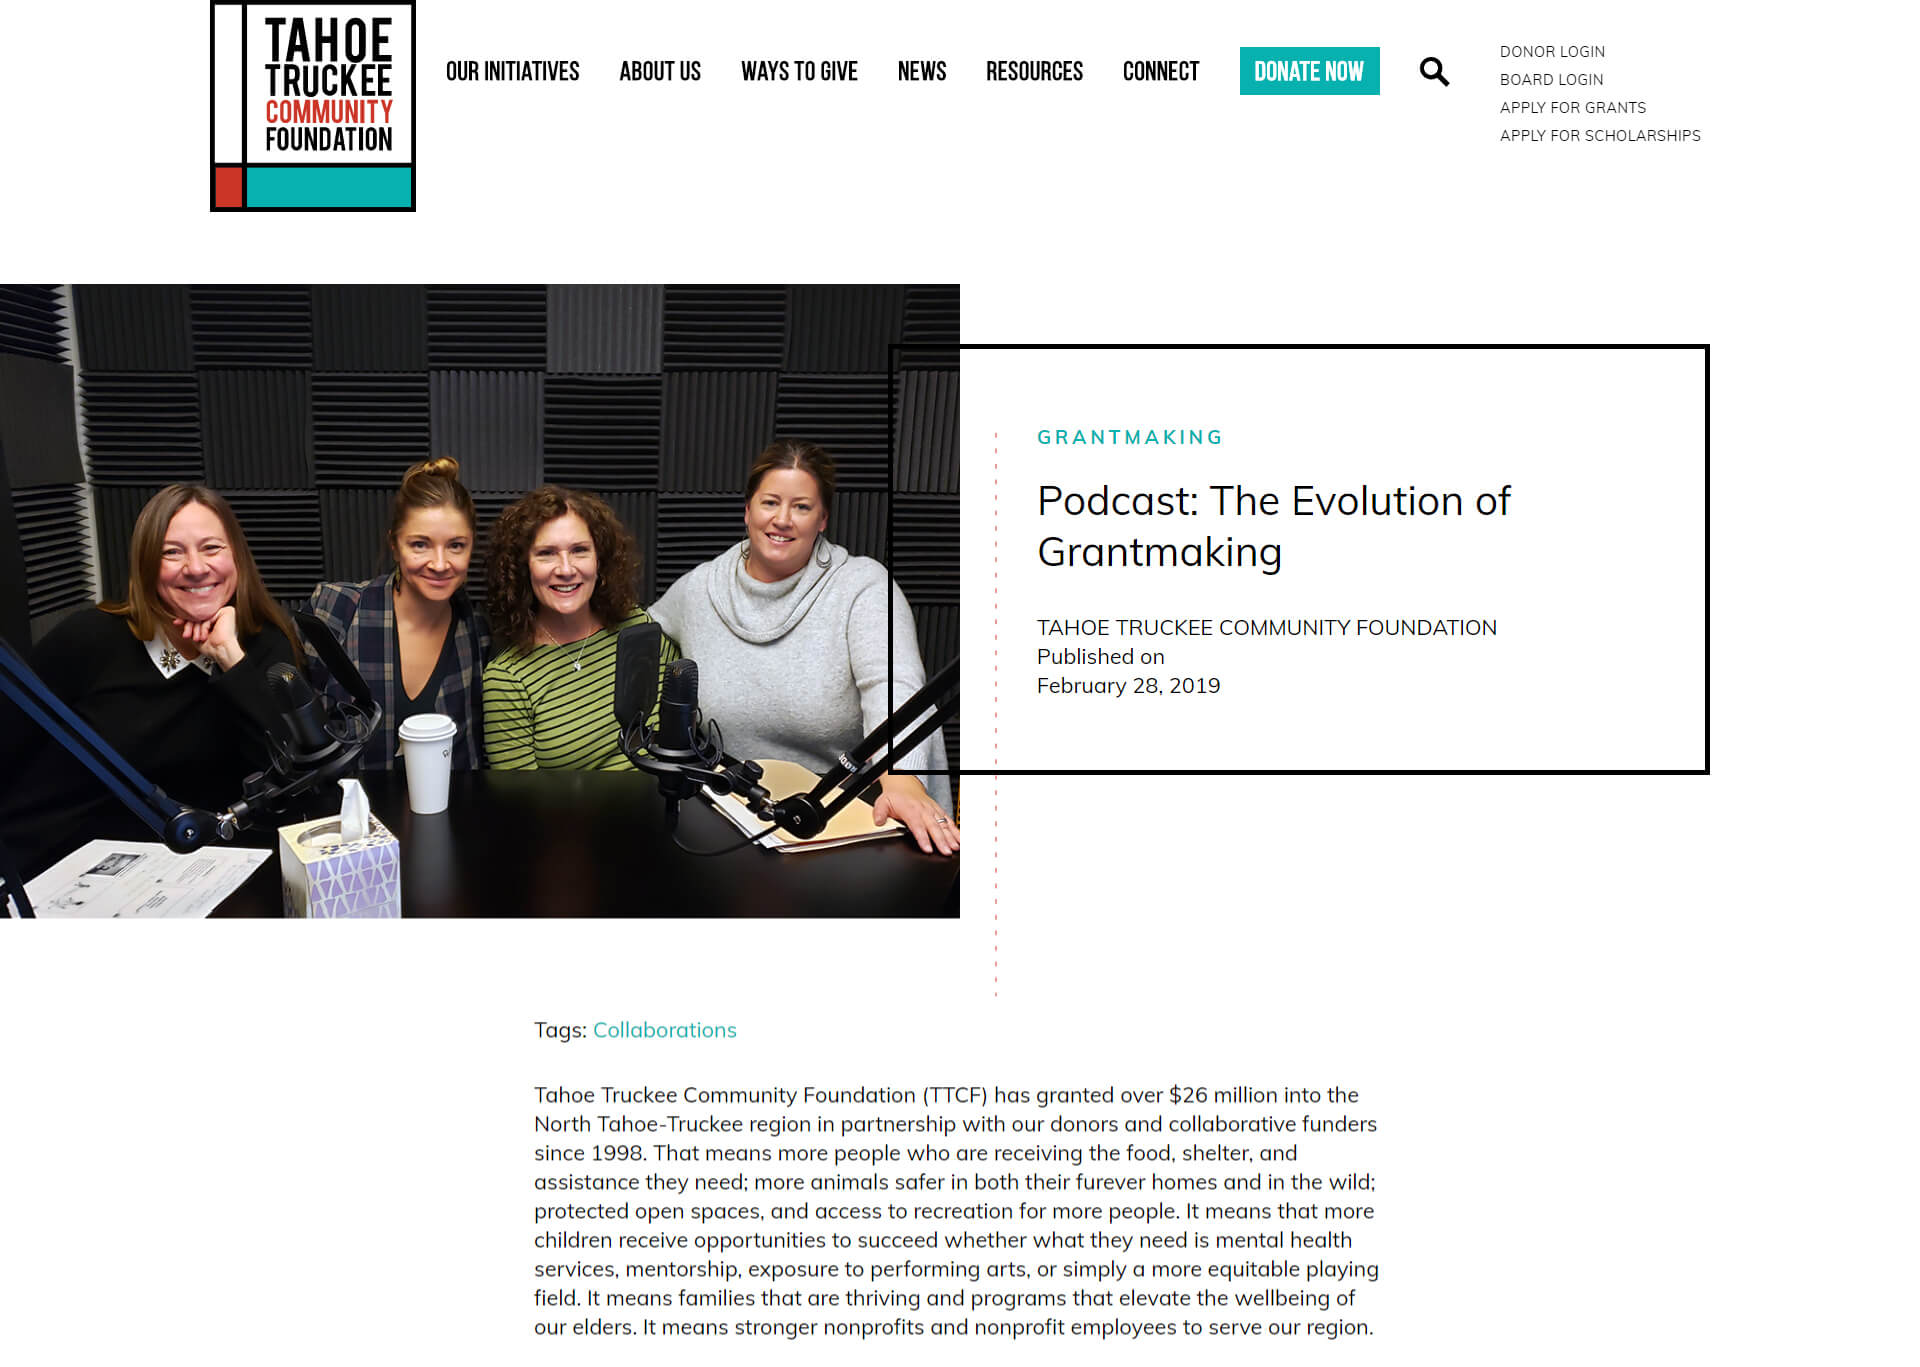 Tahoe Truckee Community Foundation podcast about the evolution of grantmaking